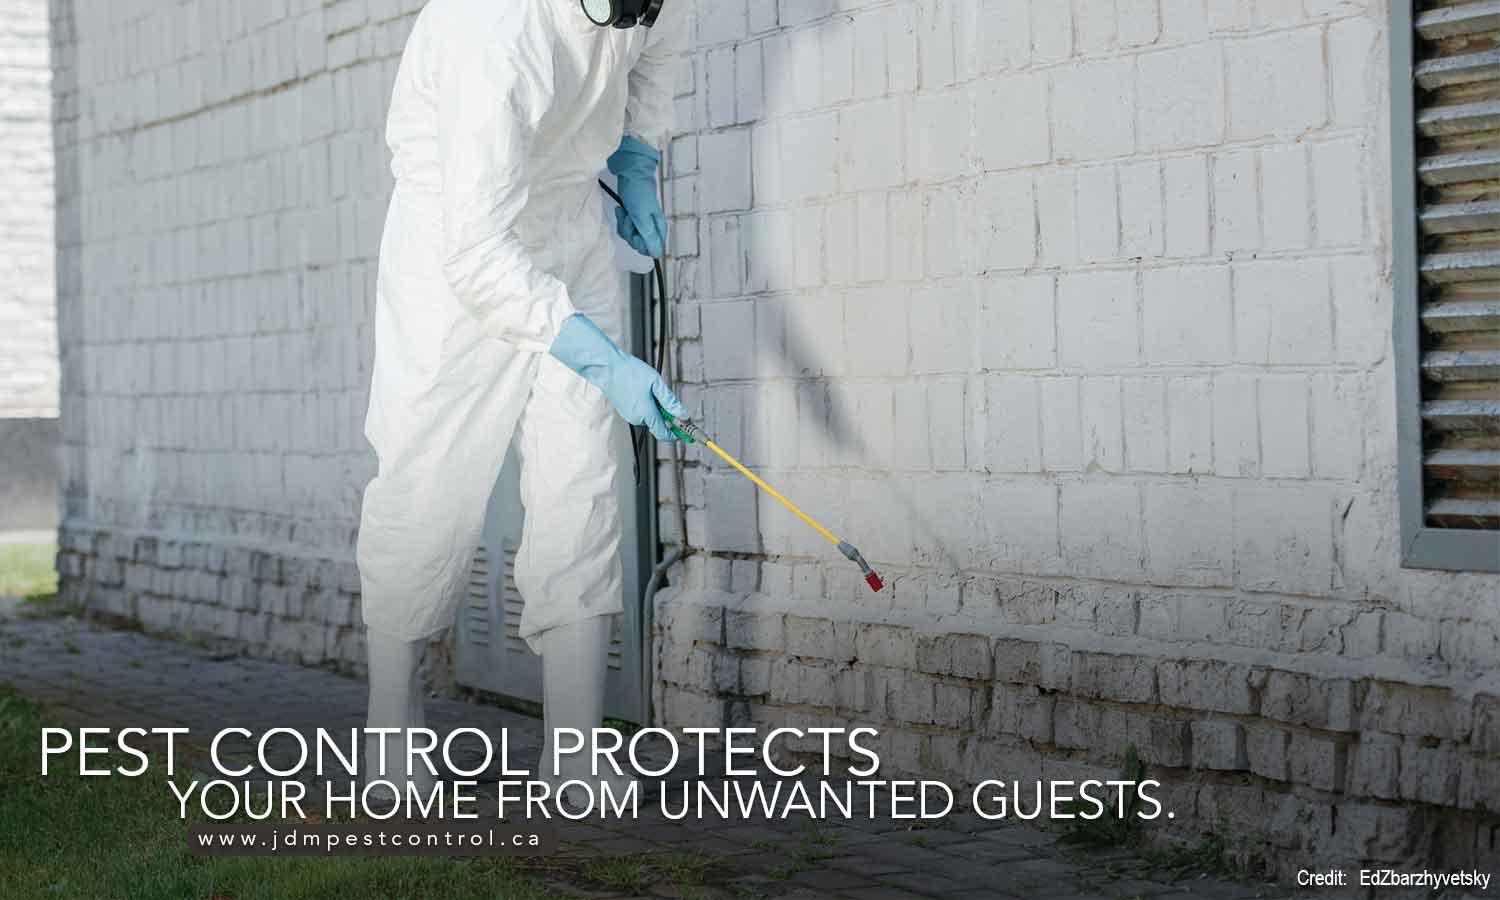 Pest control protects your home from unwanted guests.